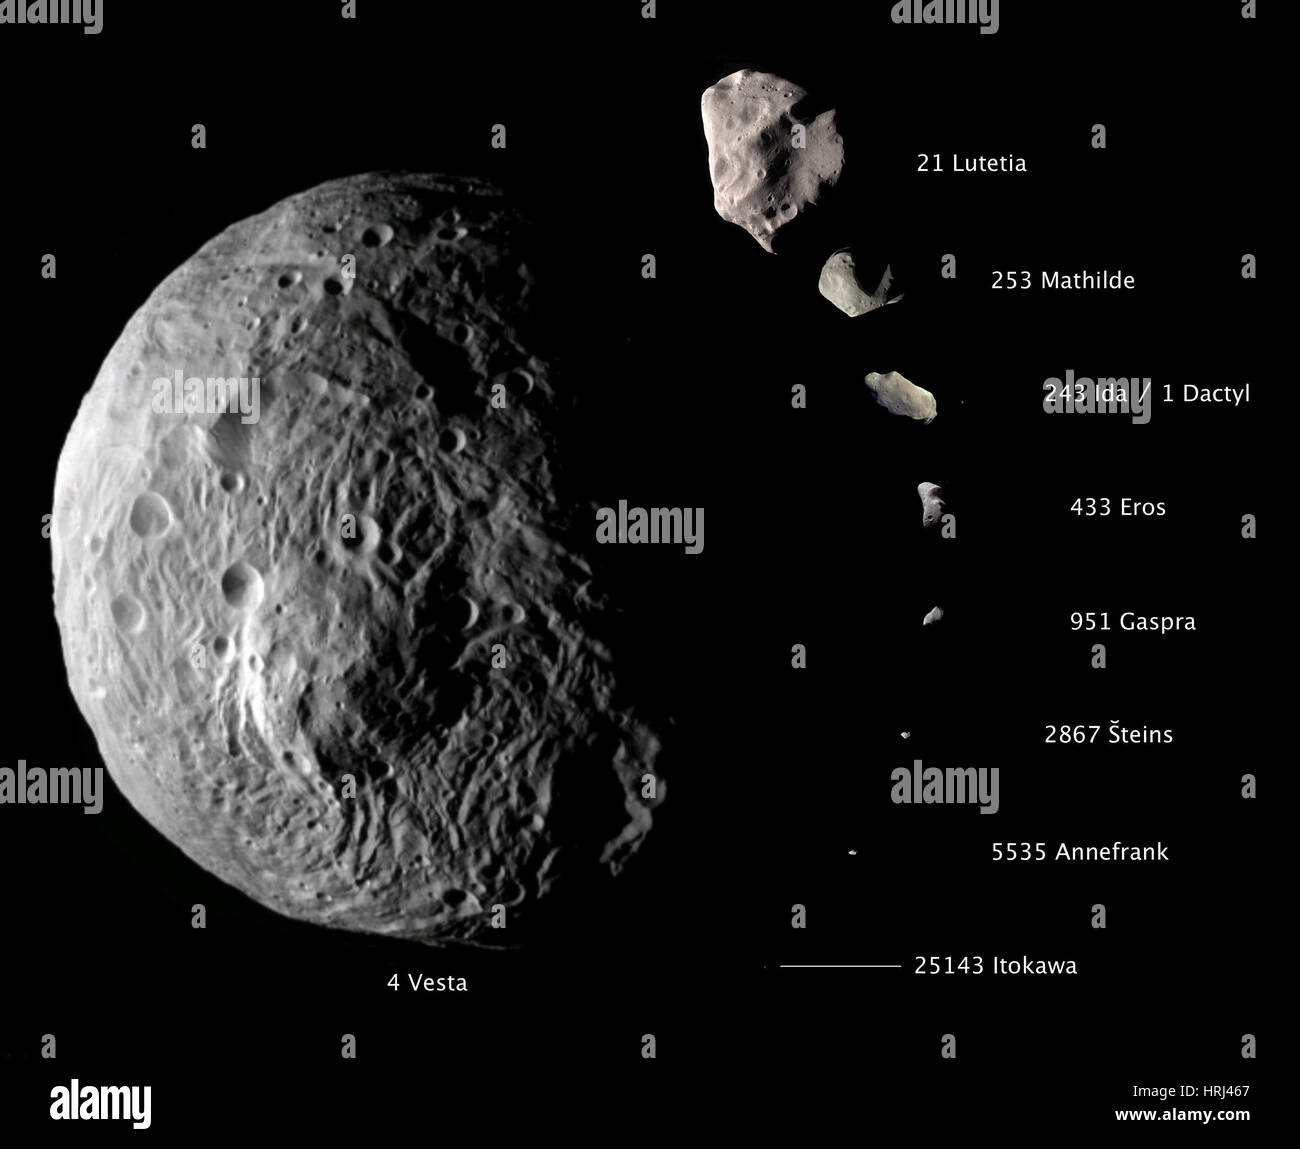 Asteroid Chart